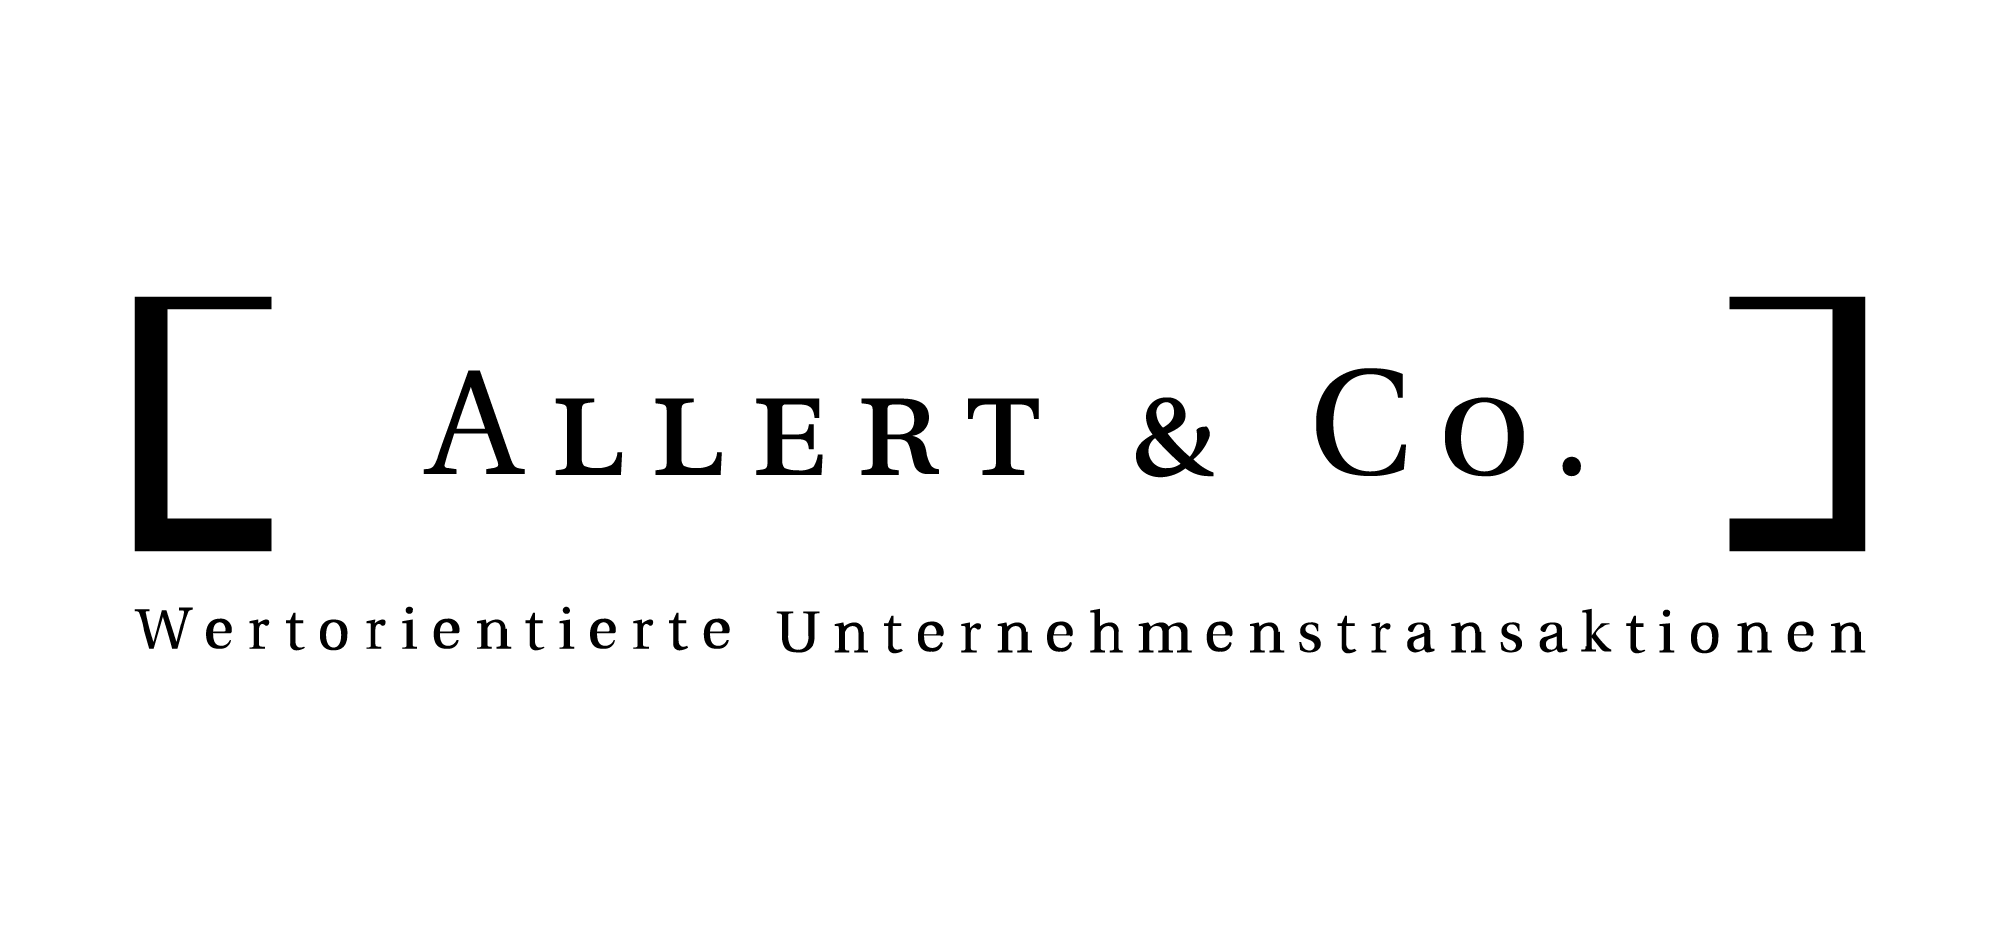 Allert & Co – Business management consulting